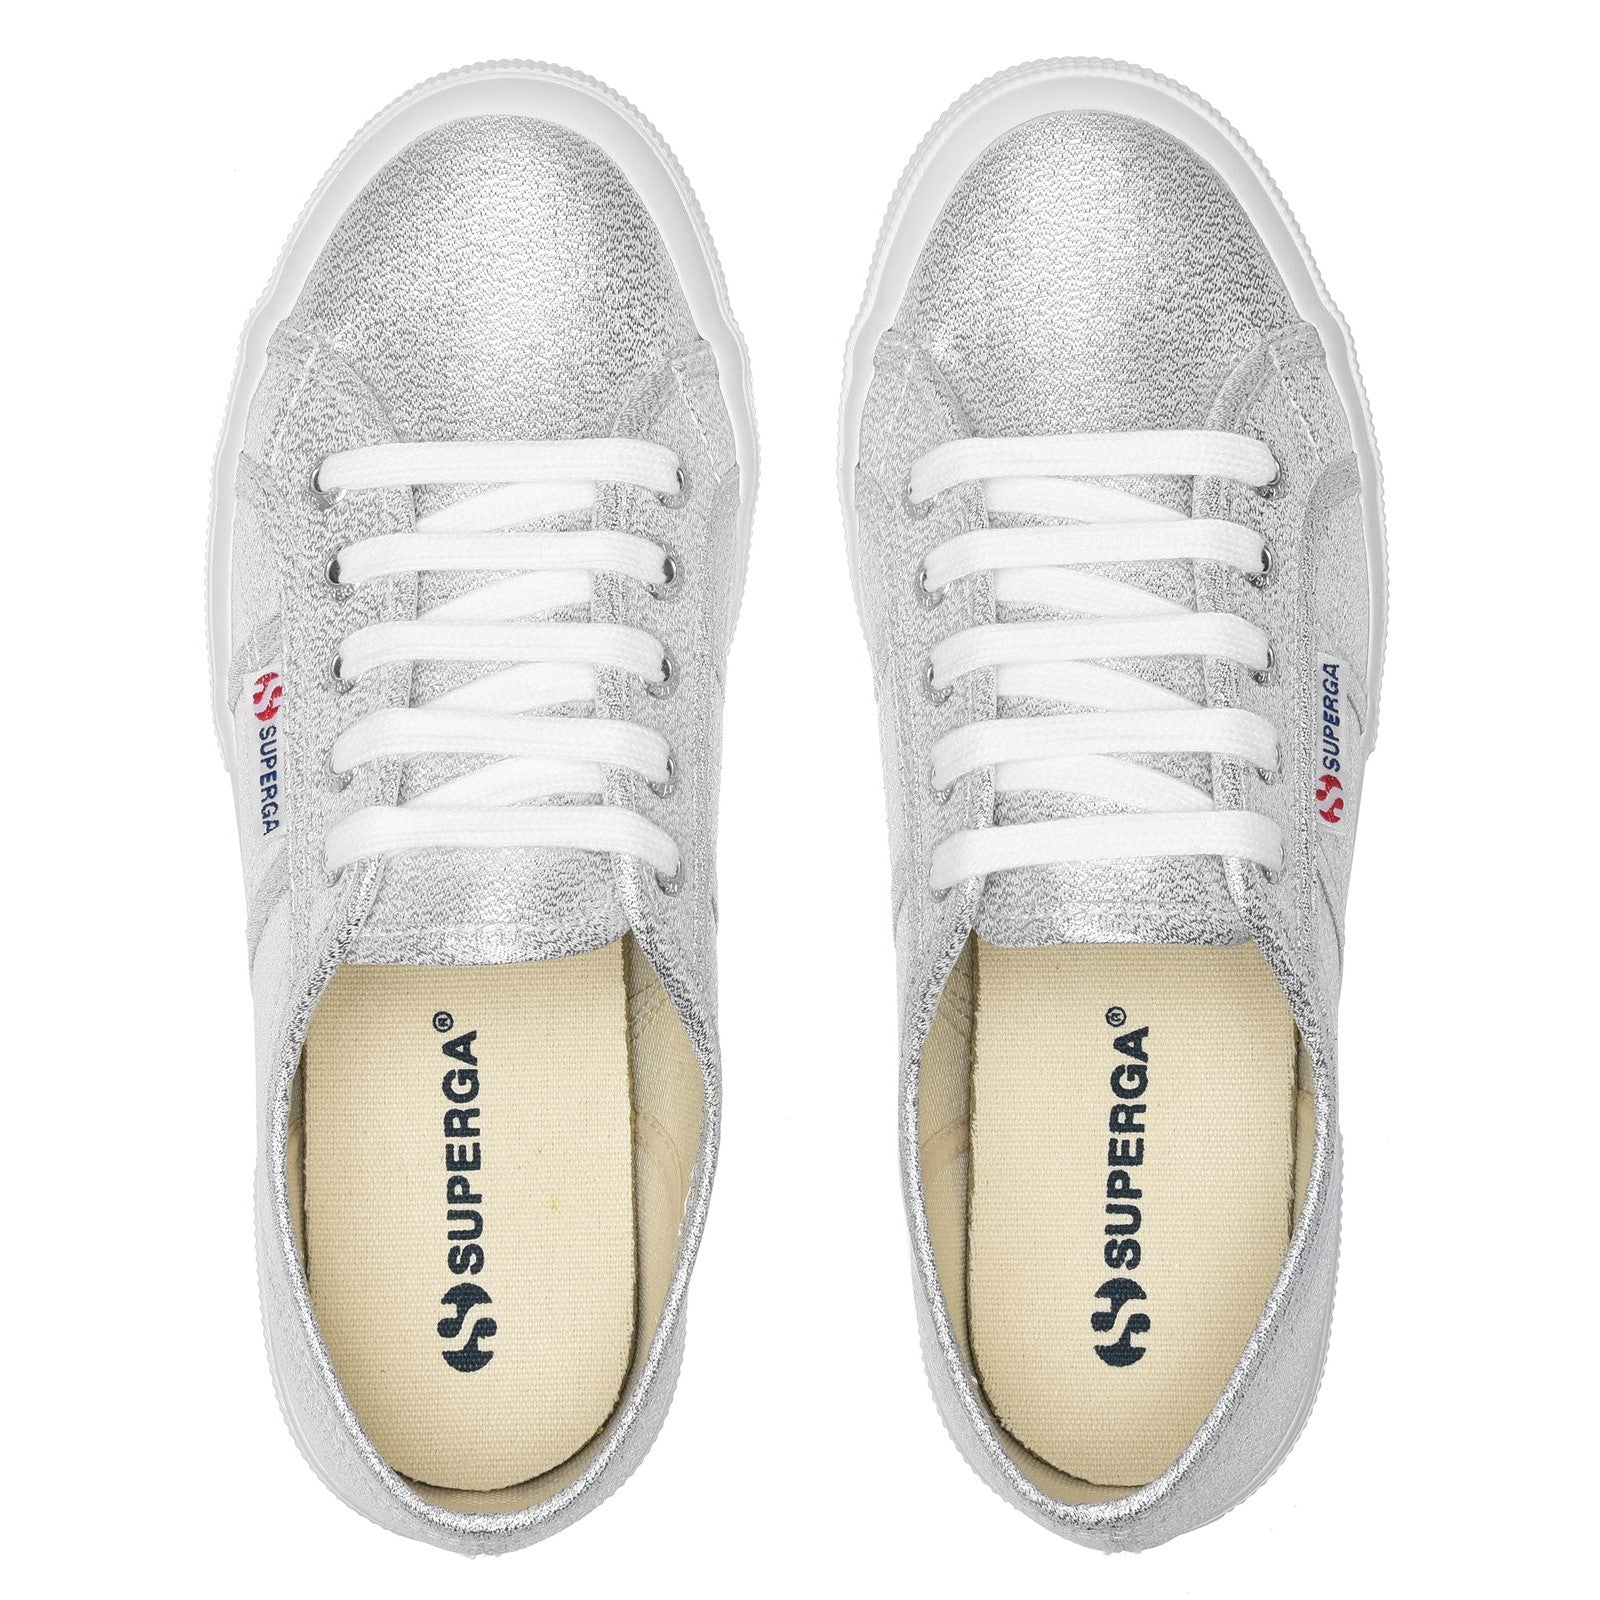 Superga - 2750 Lamew Trainer - Grey Silver - Canvas Shoes